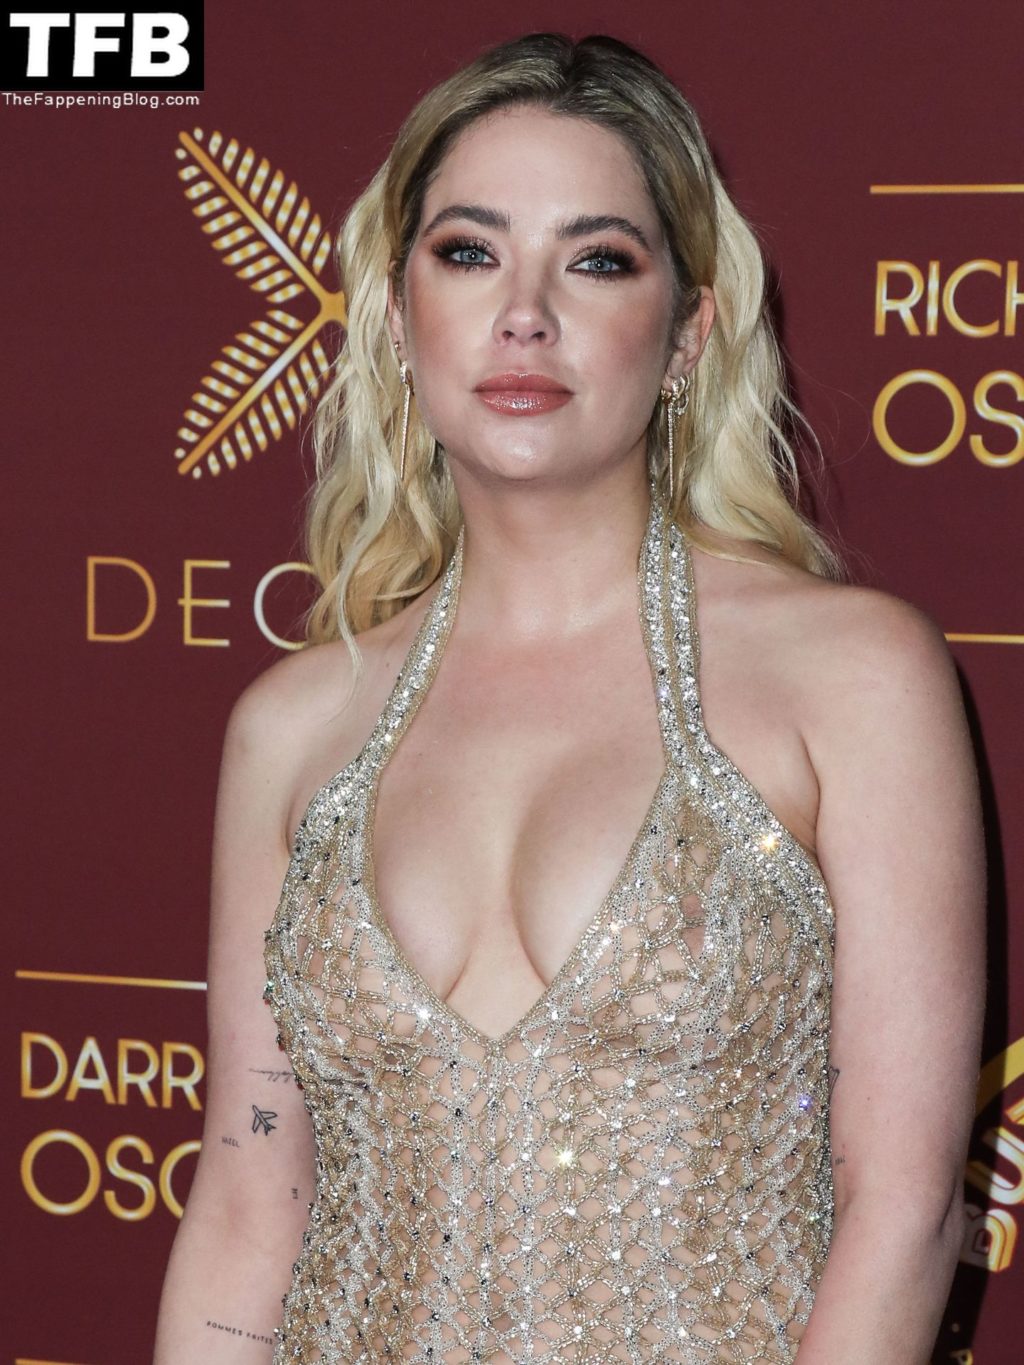 Ashley Benson Sexy The Fappening Blog 5 1 1024x1365 - Ashley Benson Displays Nice Cleavage at the Darren Dzienciol and Richie Akiva Oscar Party (39 Photos)